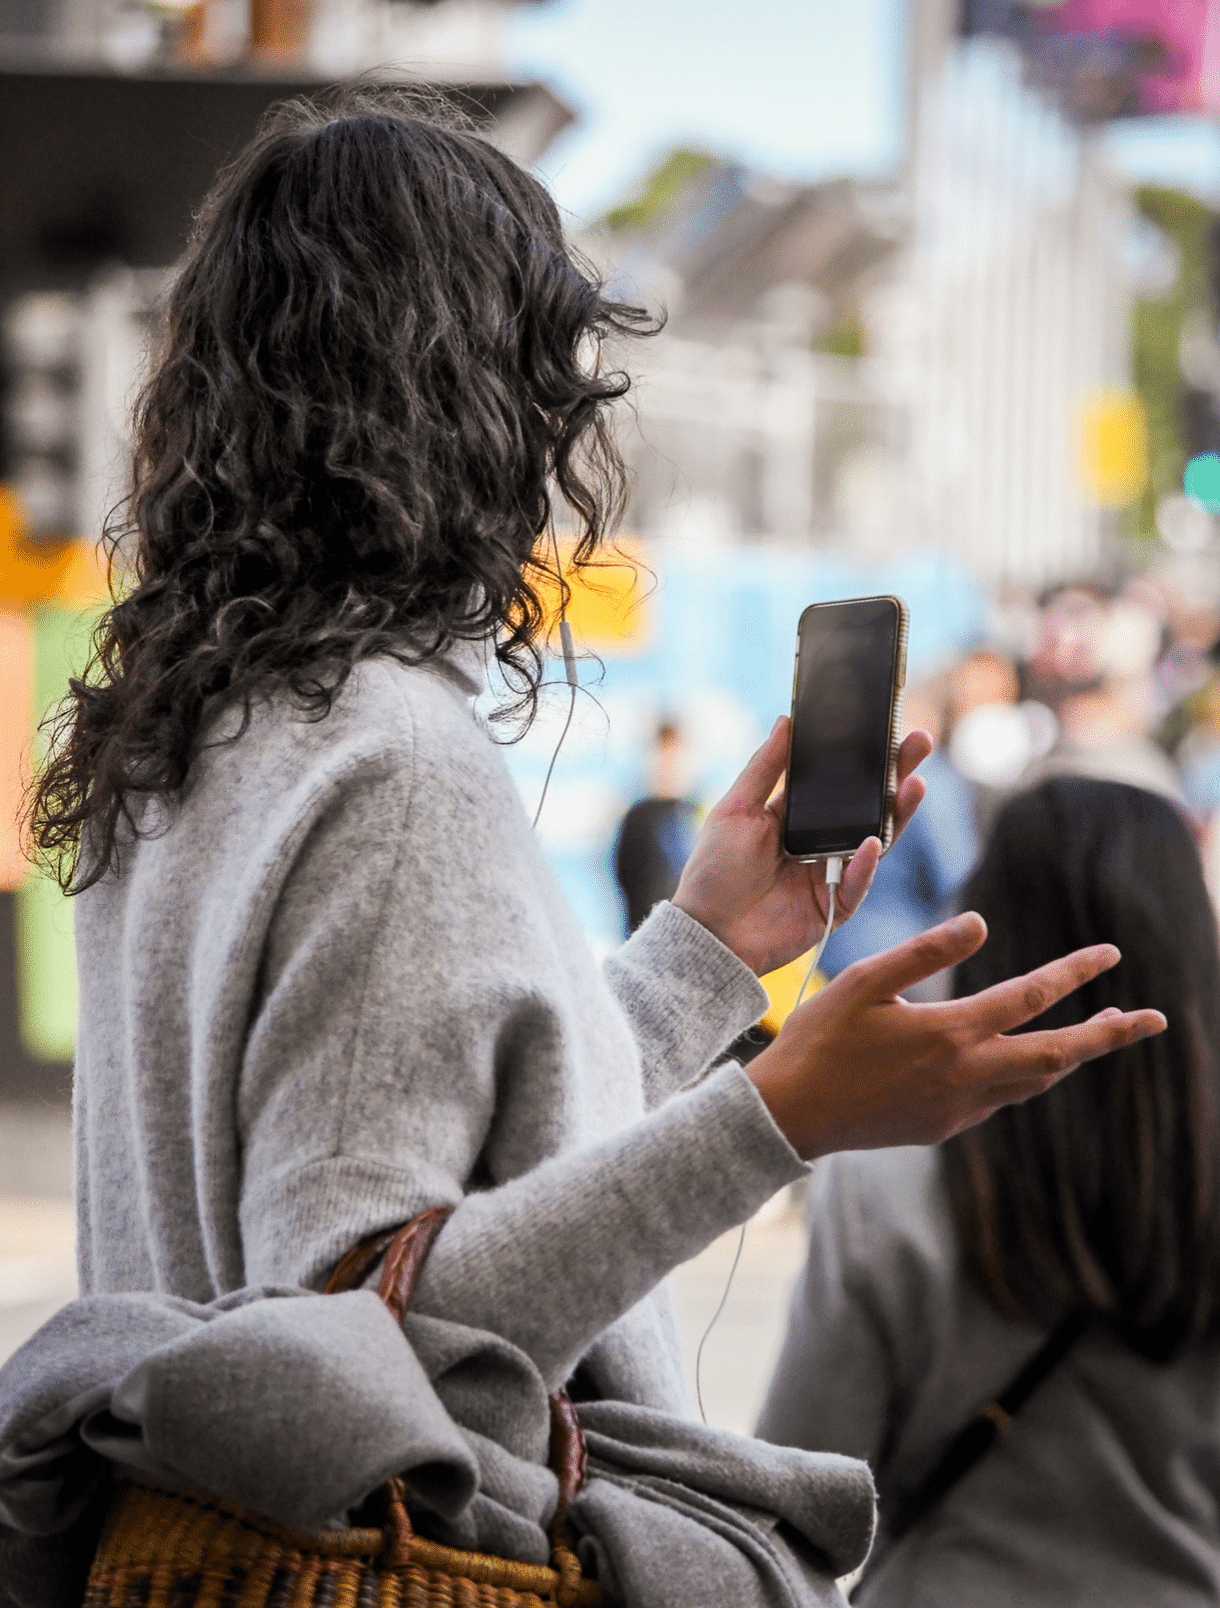 Woman using video call function while walking on the street